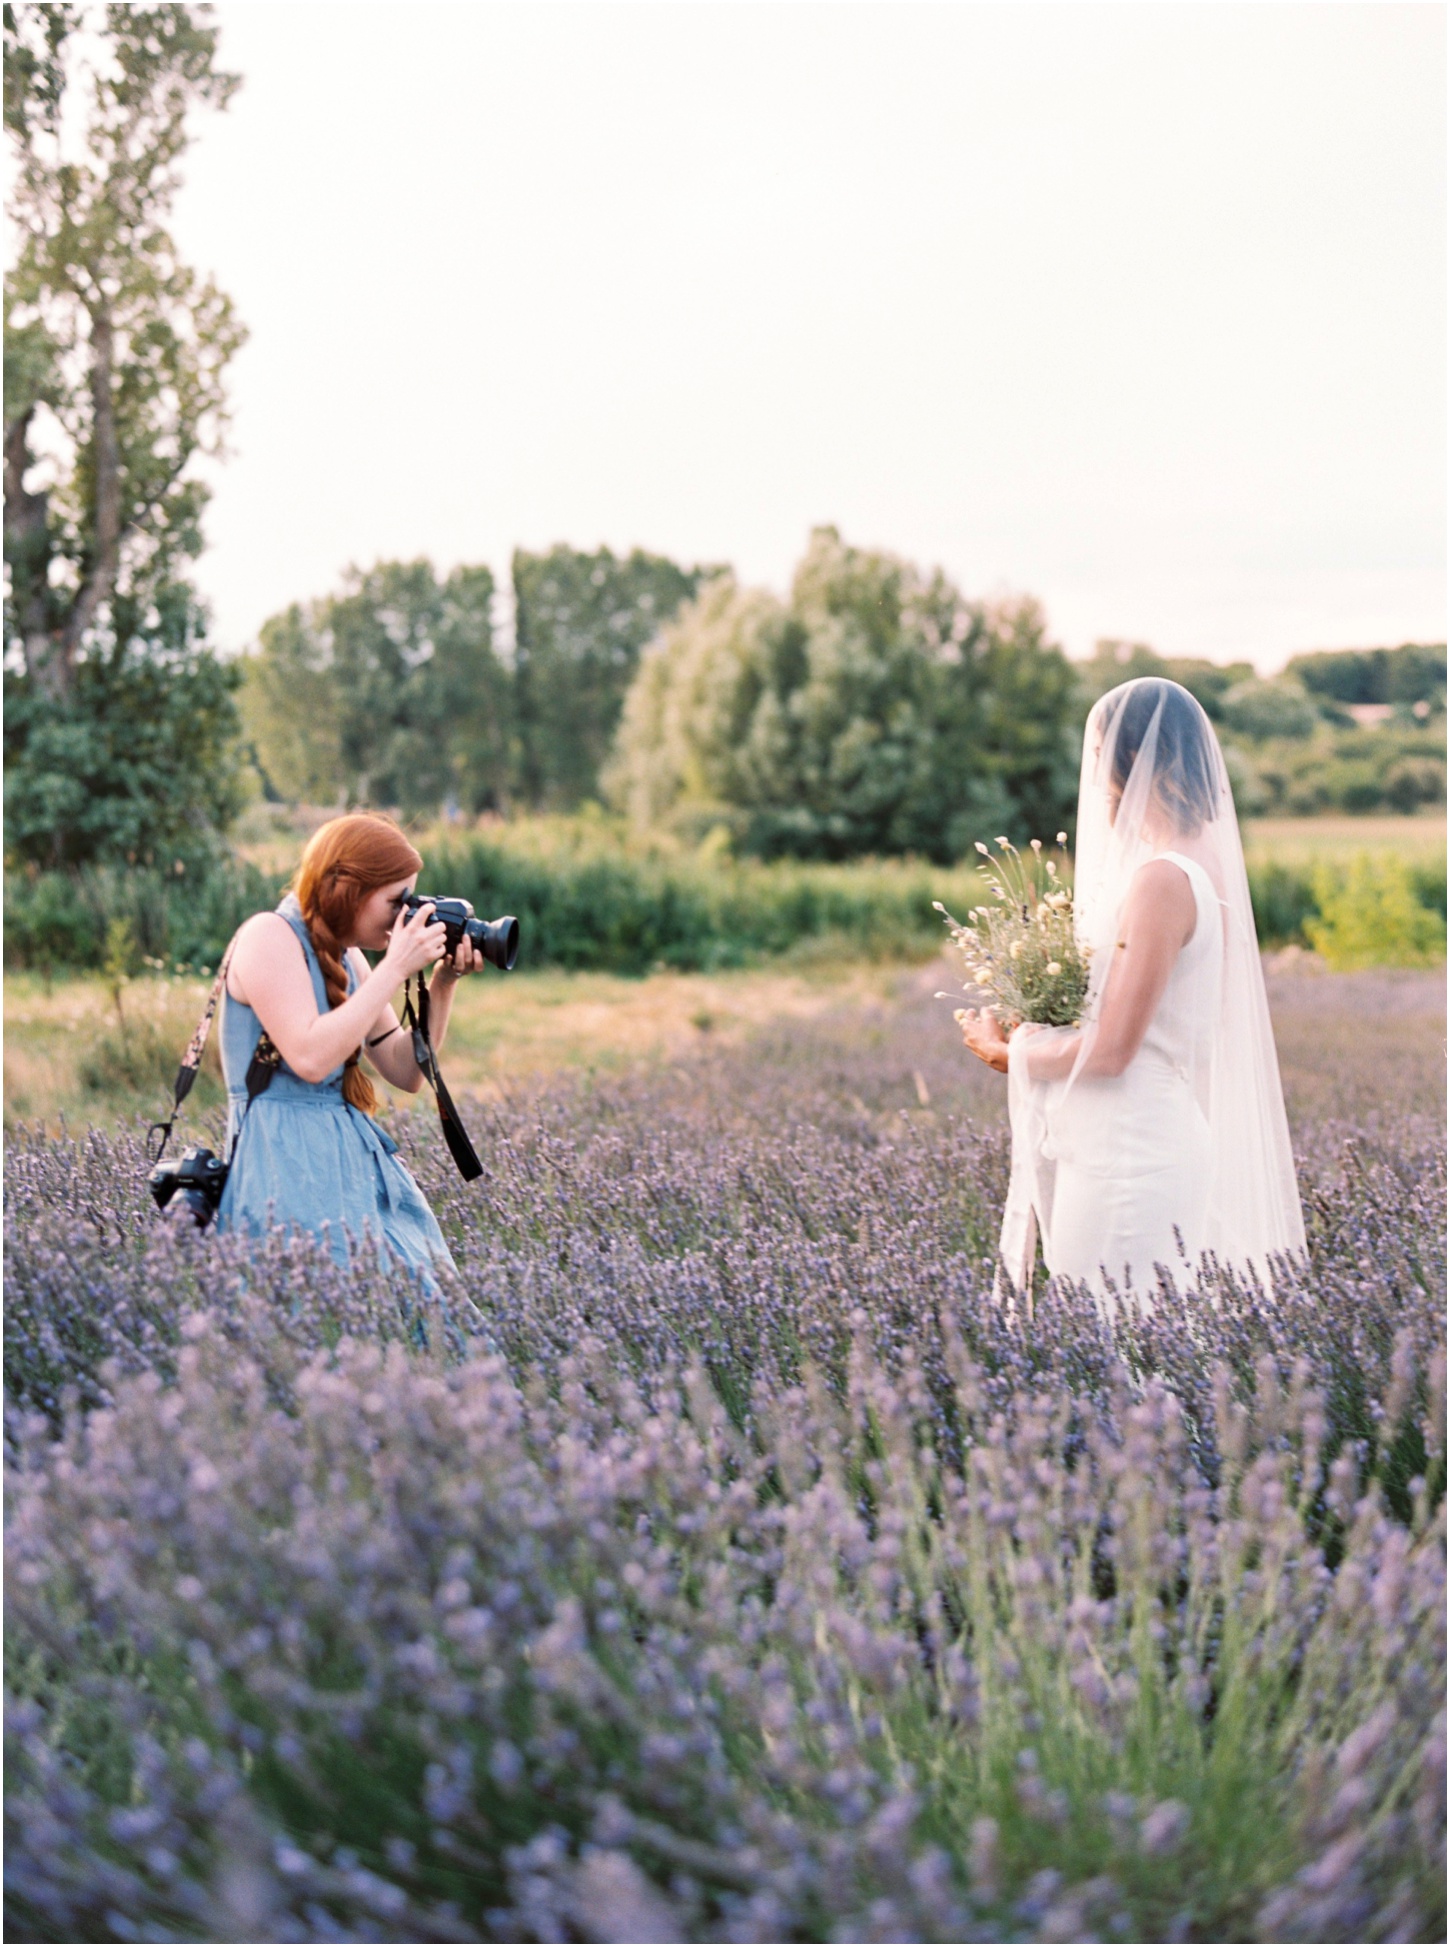 Everyone looked beautiful photographing in Provence! Cathleen Jia sent some beautiful wedding dresses and veils!